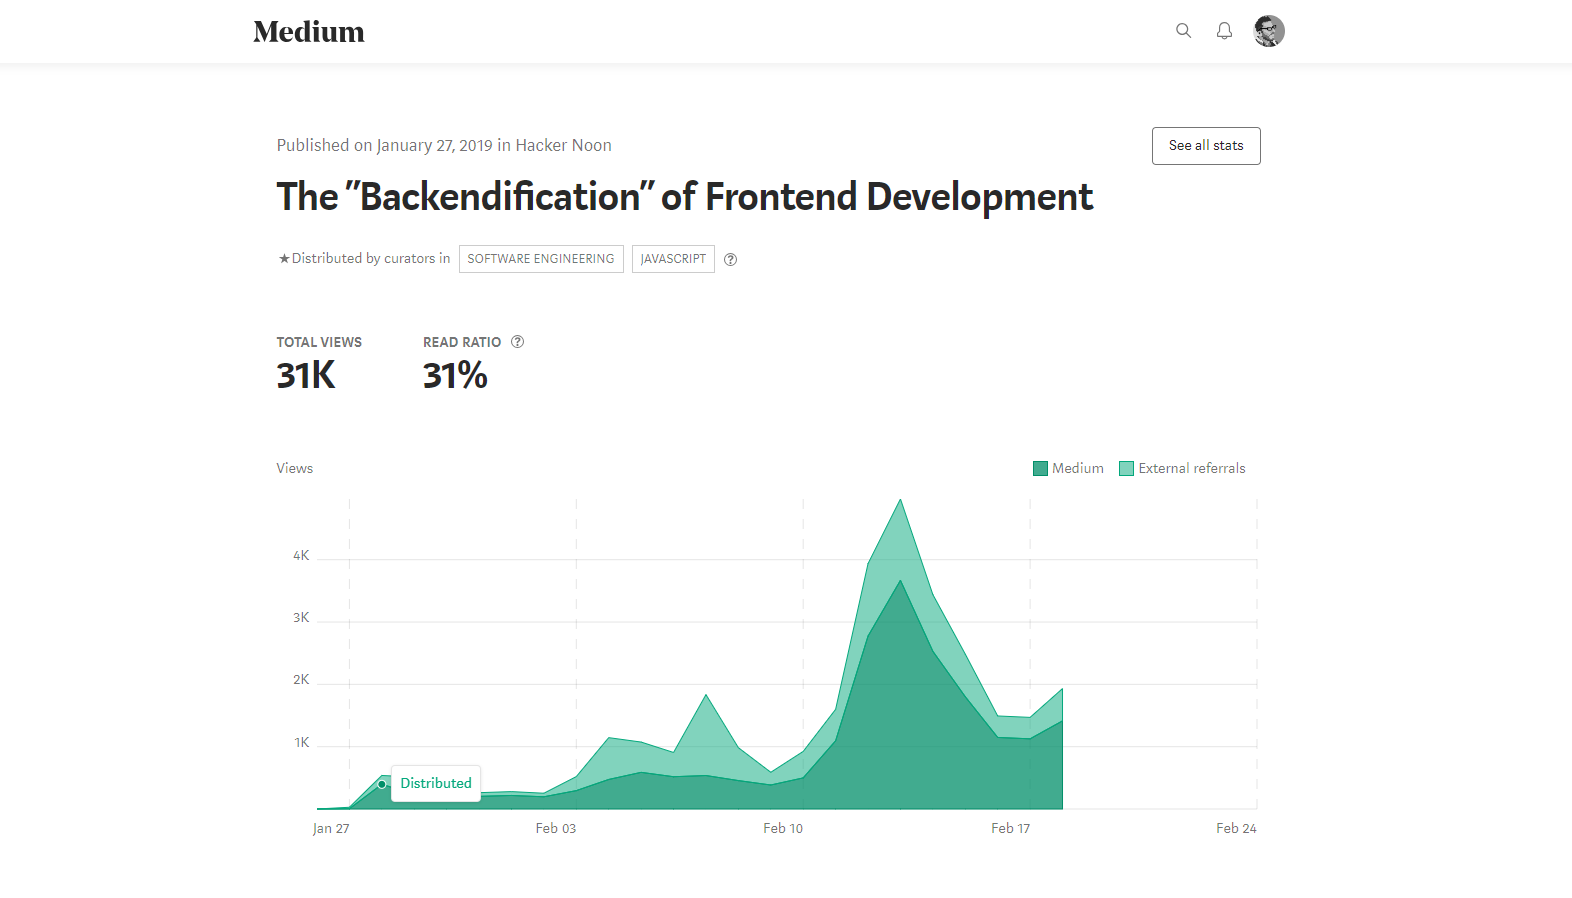 Image of Medium Statistics Page for Backendification showing 10.3k, 30% read ratio.  The line graph shows a peak daily volume occuring on Feb 7, 2019.  On that day, there was 1.8K visitors (1.2K organic referal + 537 via Medium).